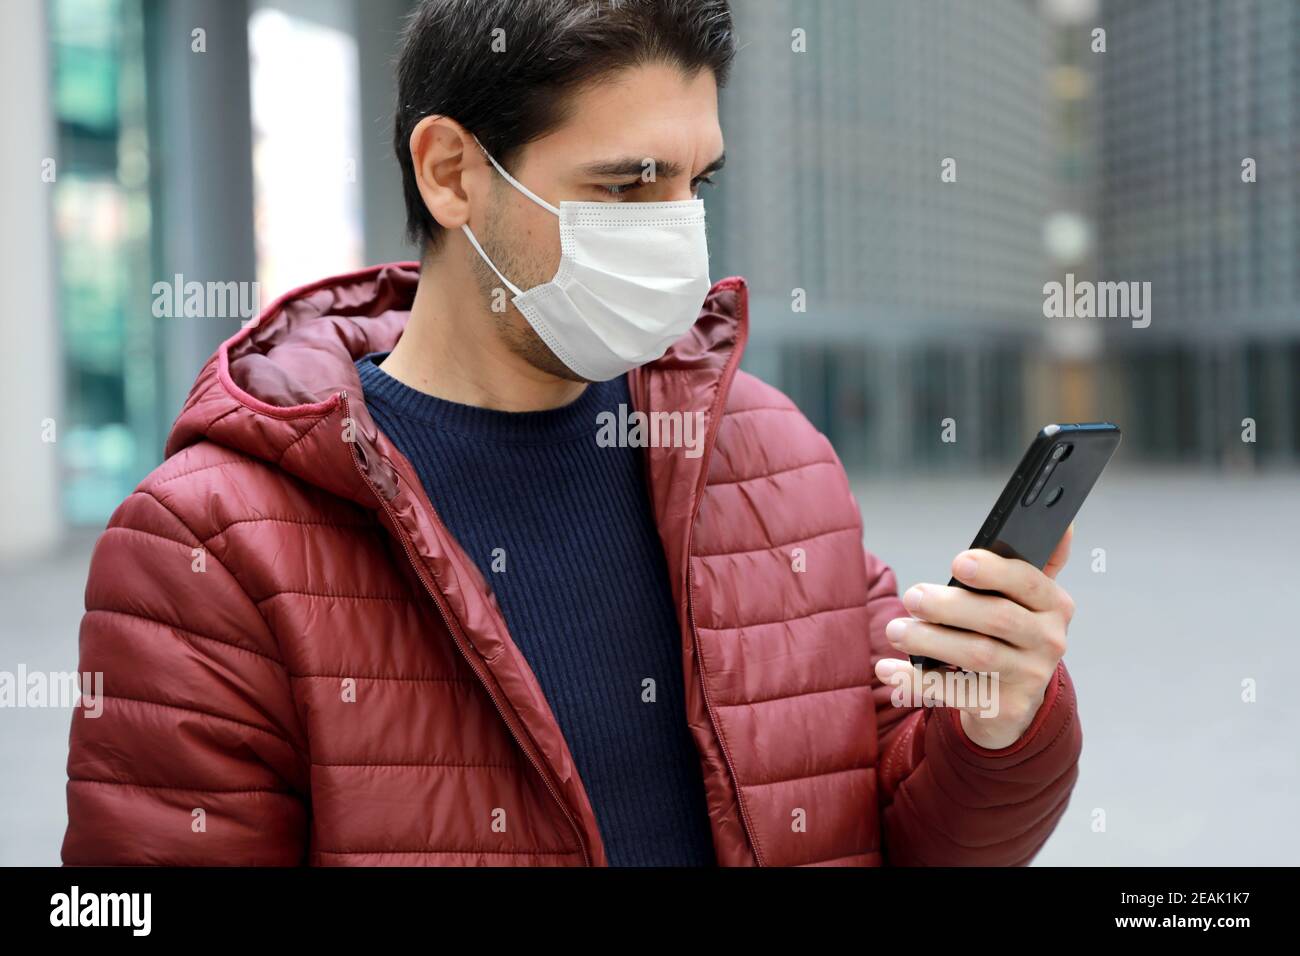 COVID-19 Portrait of young man wearing protective mask reading news on smartphone app in modern city street Stock Photo